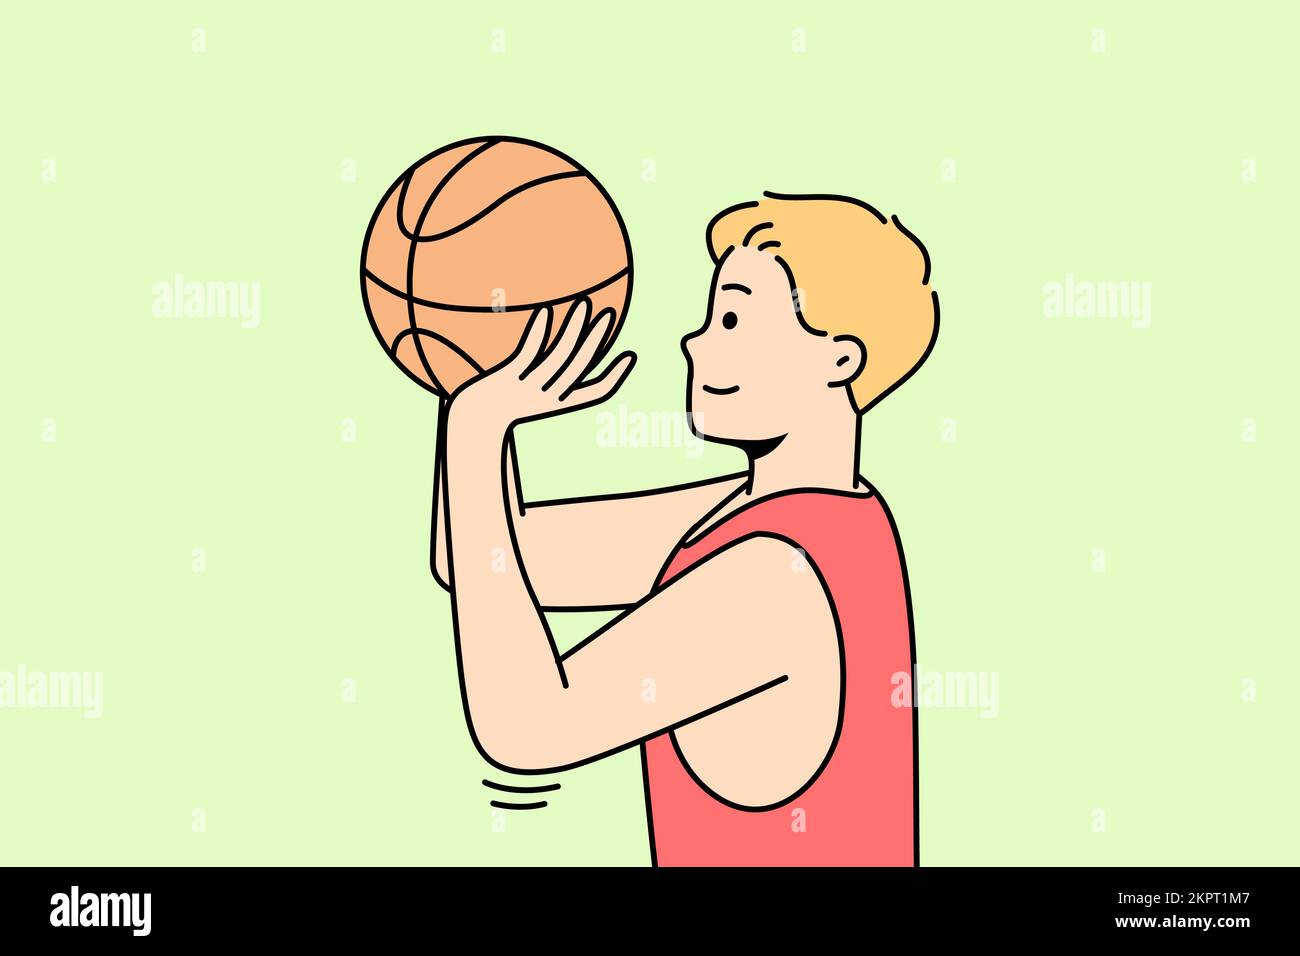 Basketballer player Stock Vector Images - Alamy